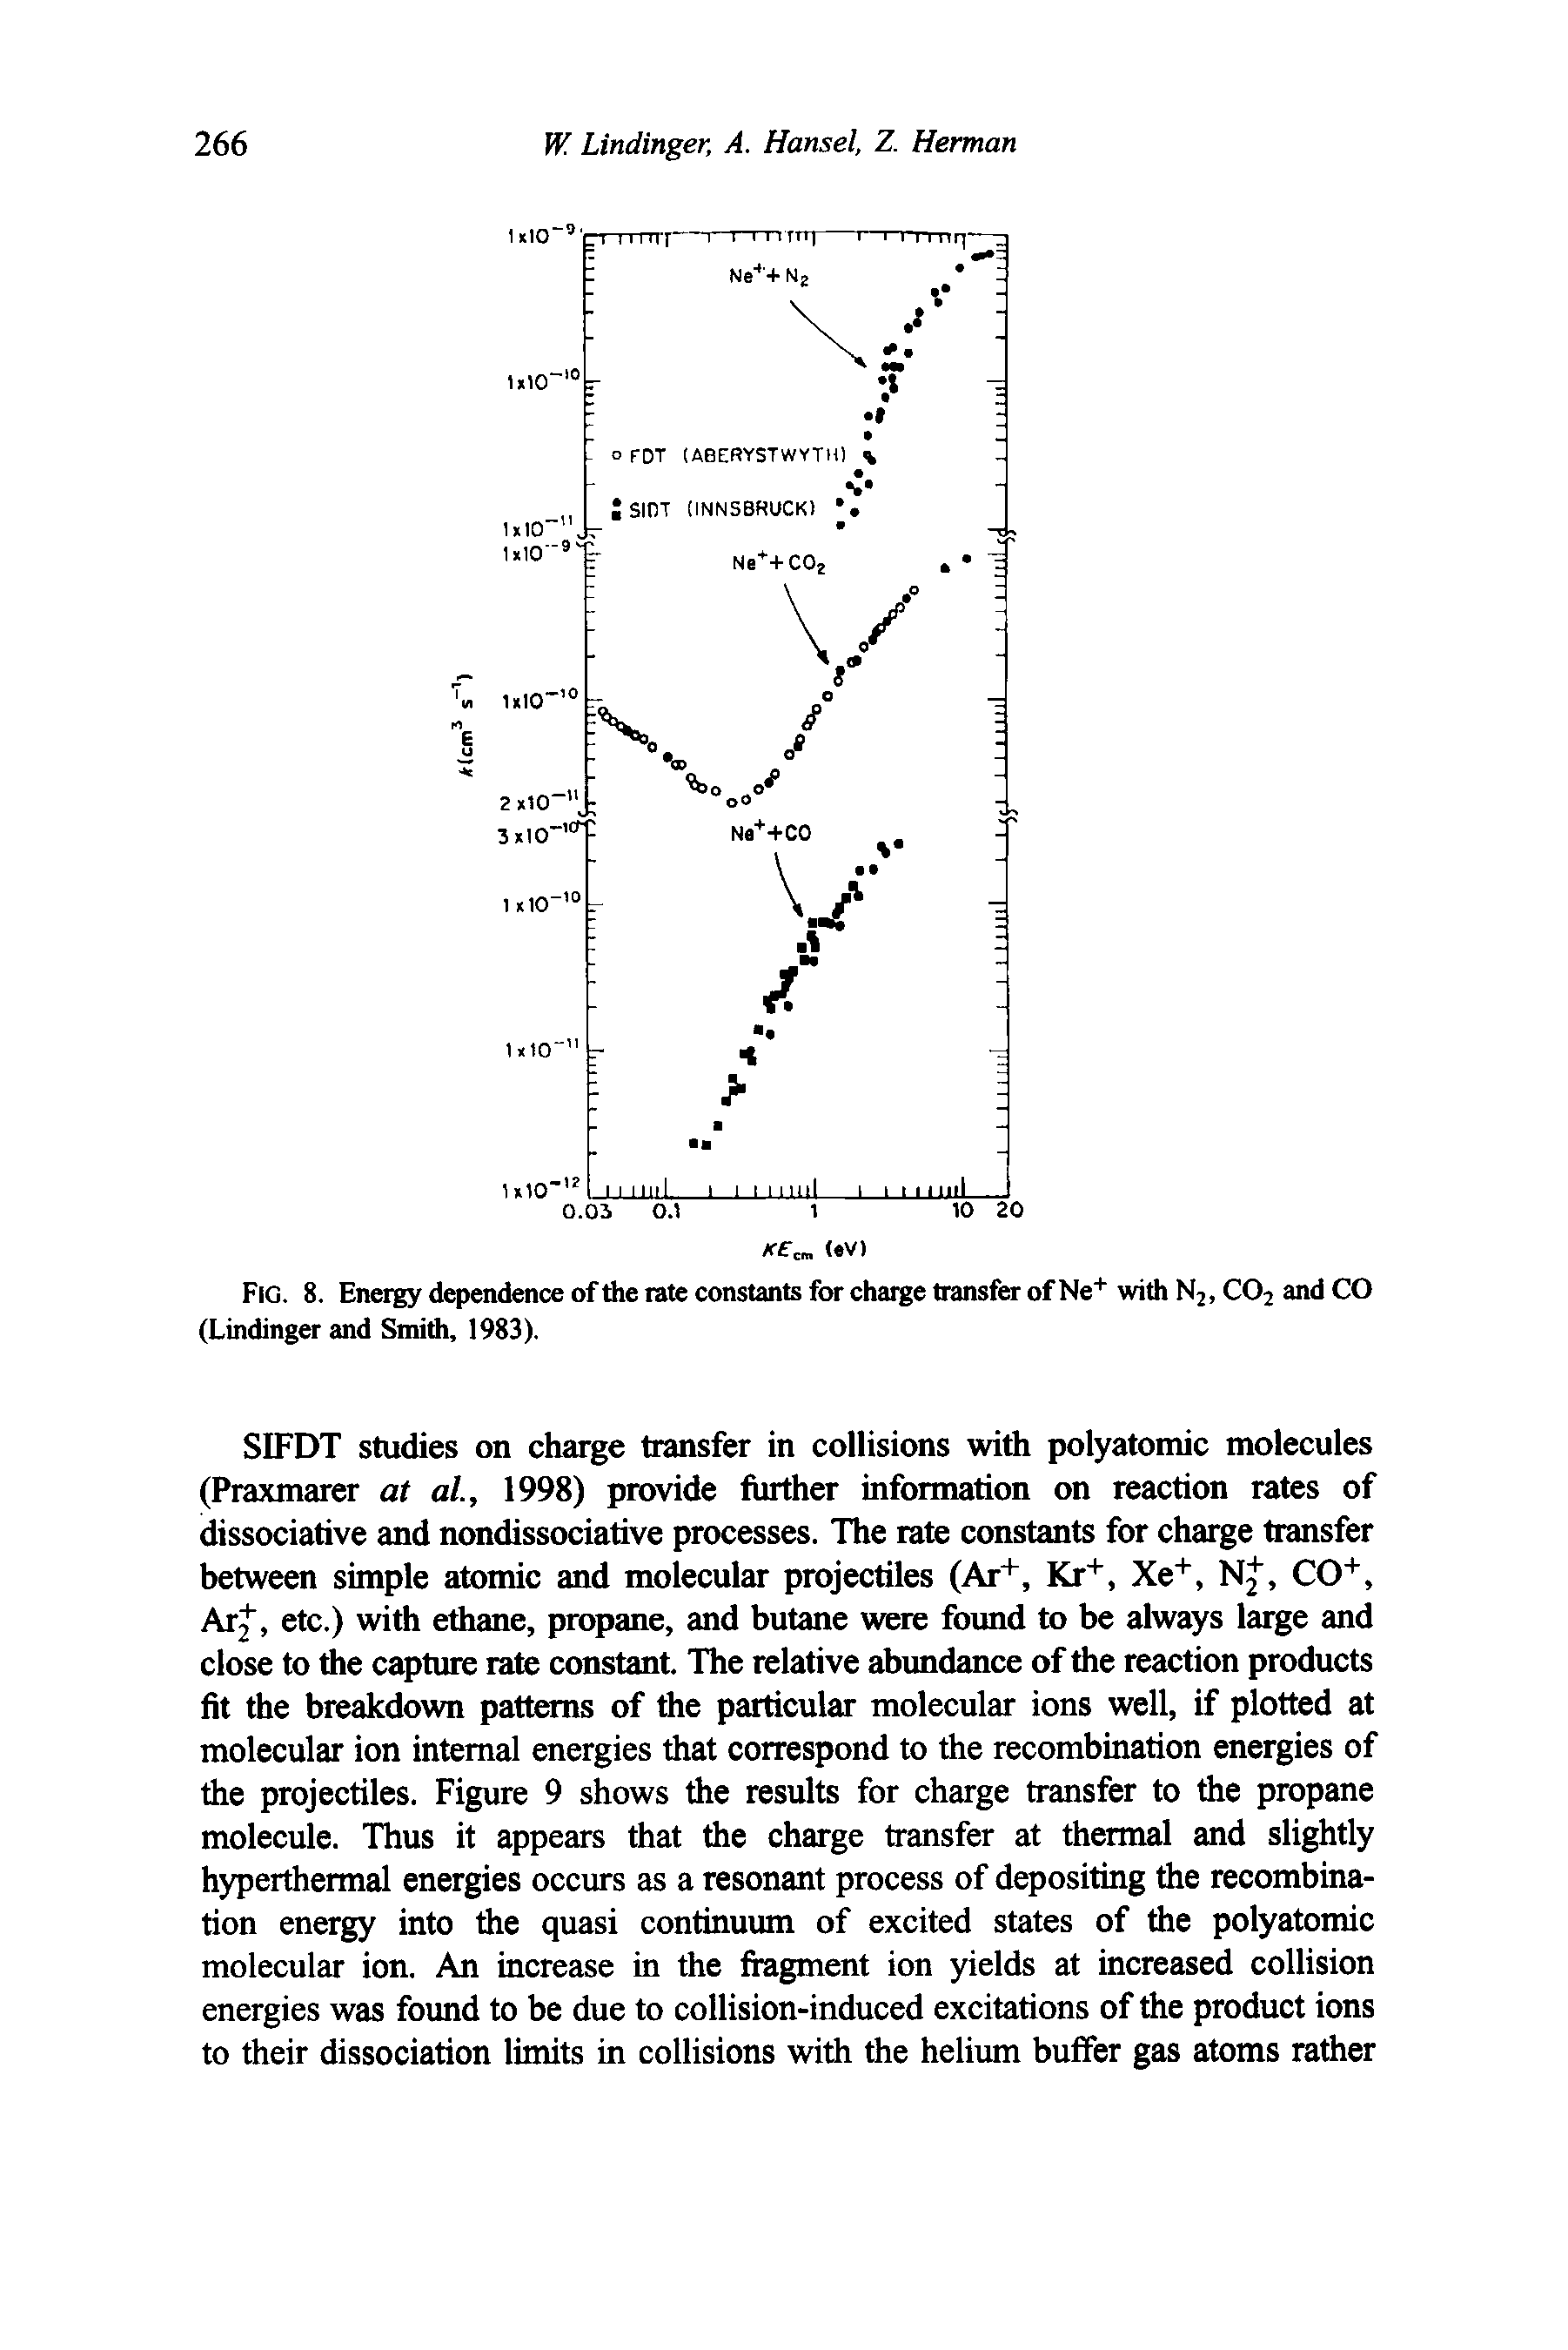 Fig. 8. Energy dependence of the rate constants for charge transfer of Ne" with N2, CO and CO (Lindinger and Smith, 1983).